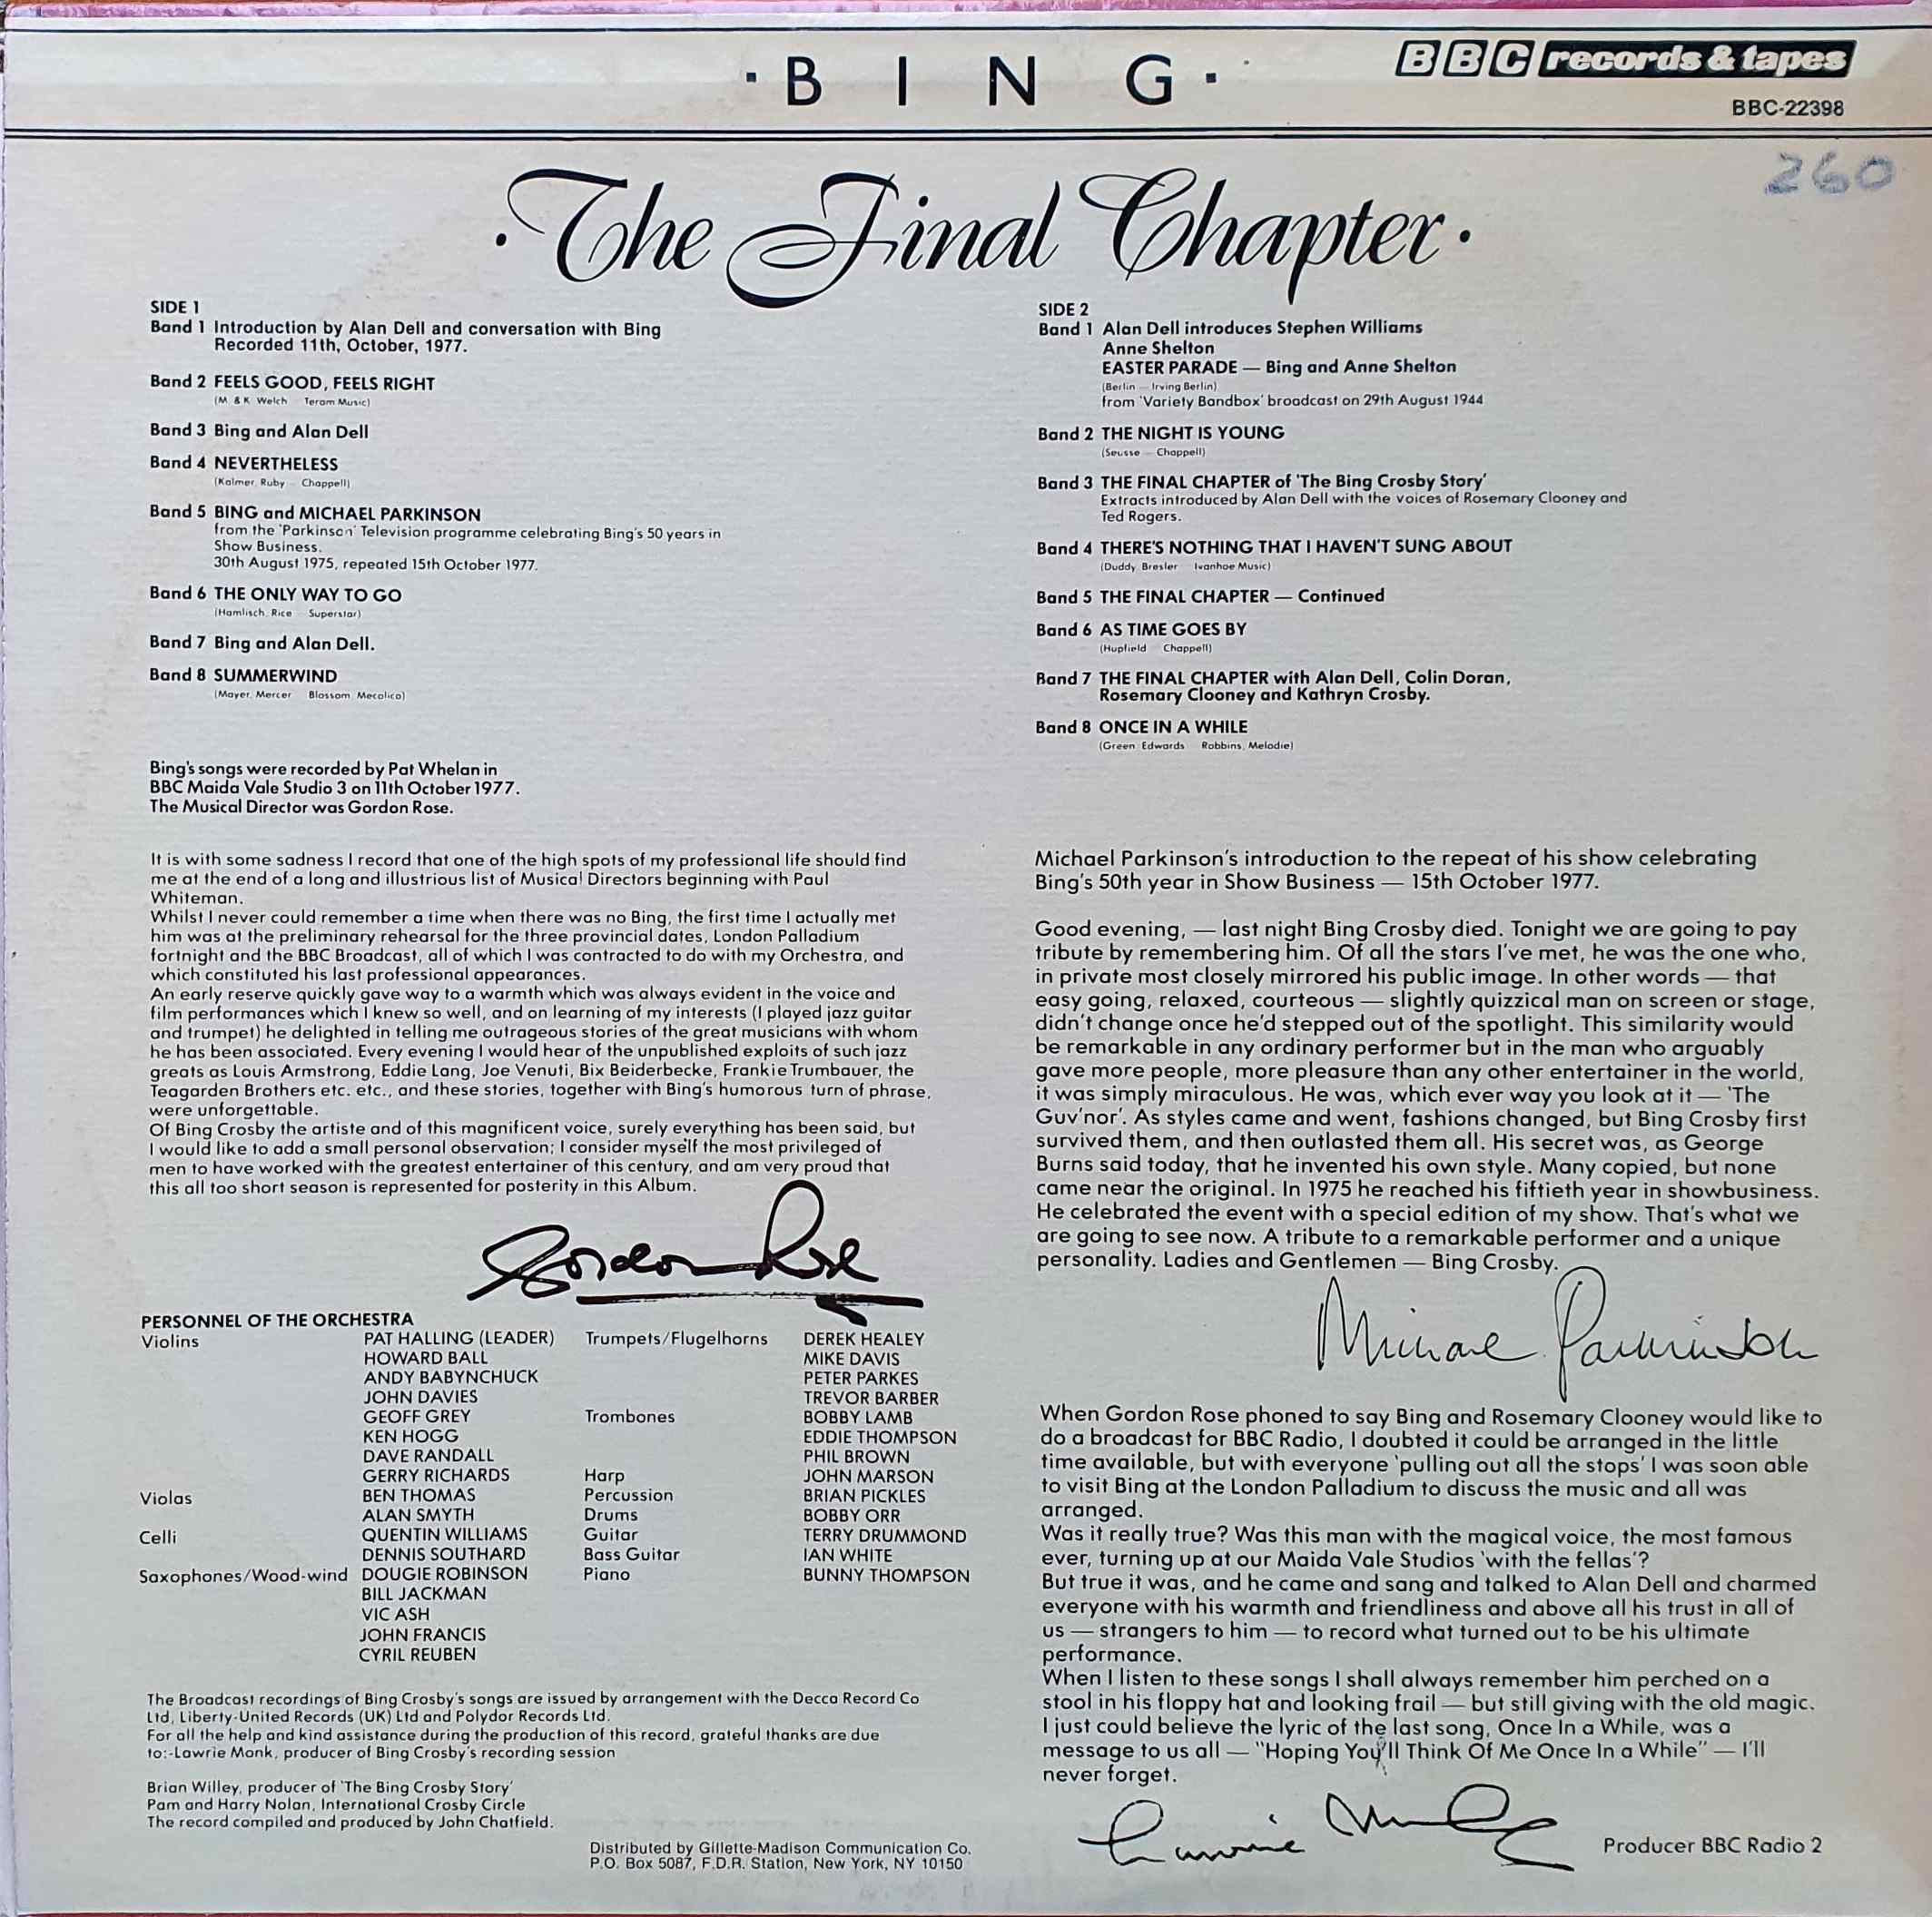 Picture of BBC - 22398 Bing - The final chapter by artist Bing Crosby from the BBC records and Tapes library